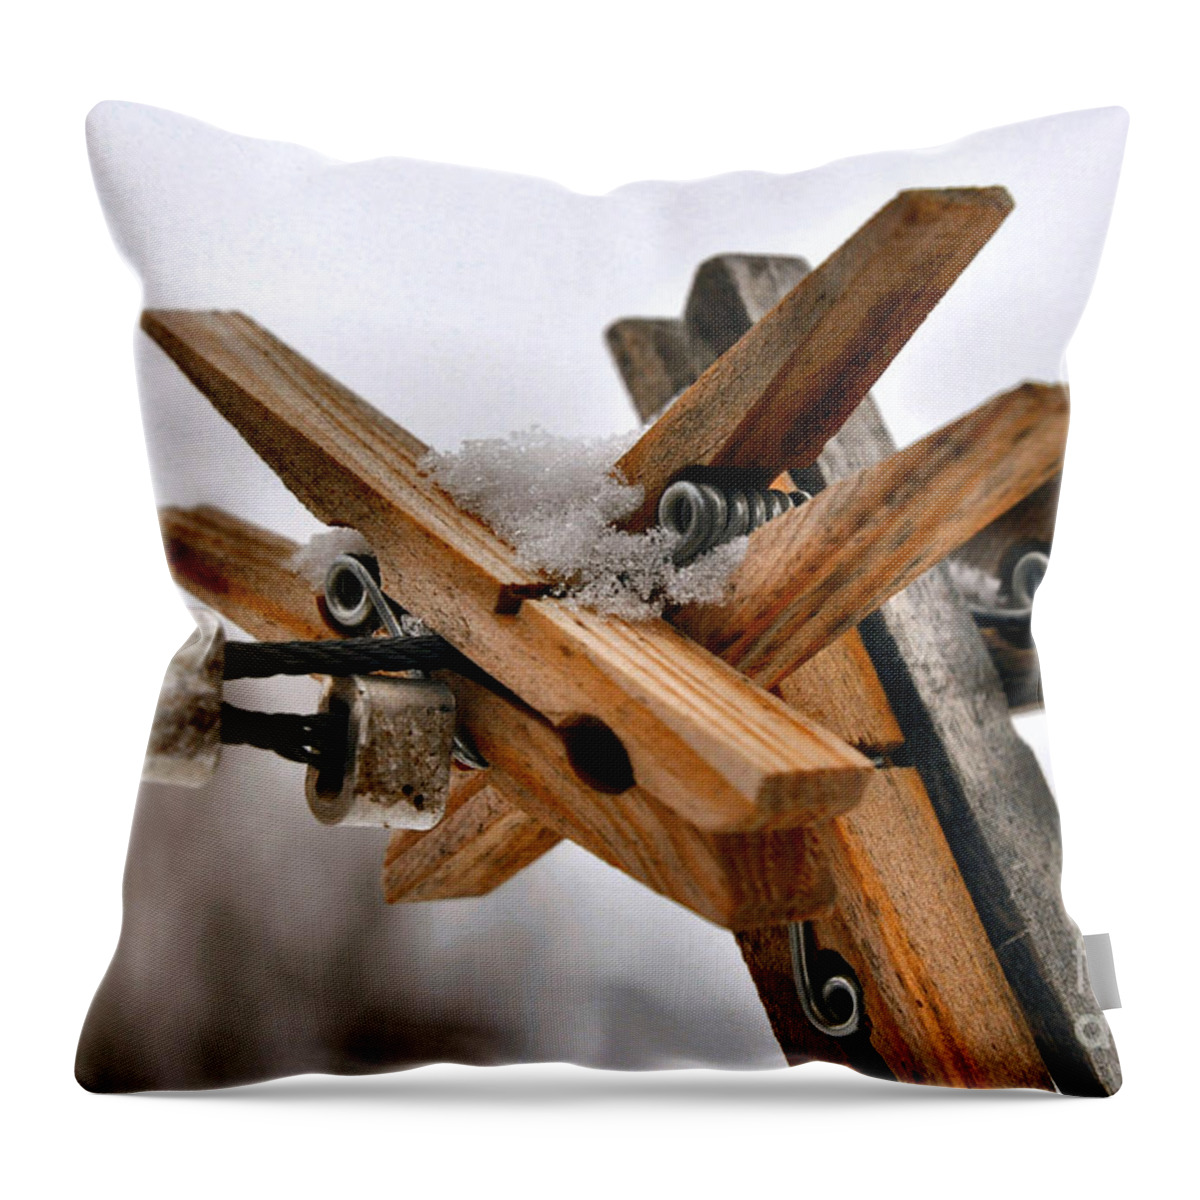 Snow Throw Pillow featuring the photograph Winter Laundry Day by Anjanette Douglas